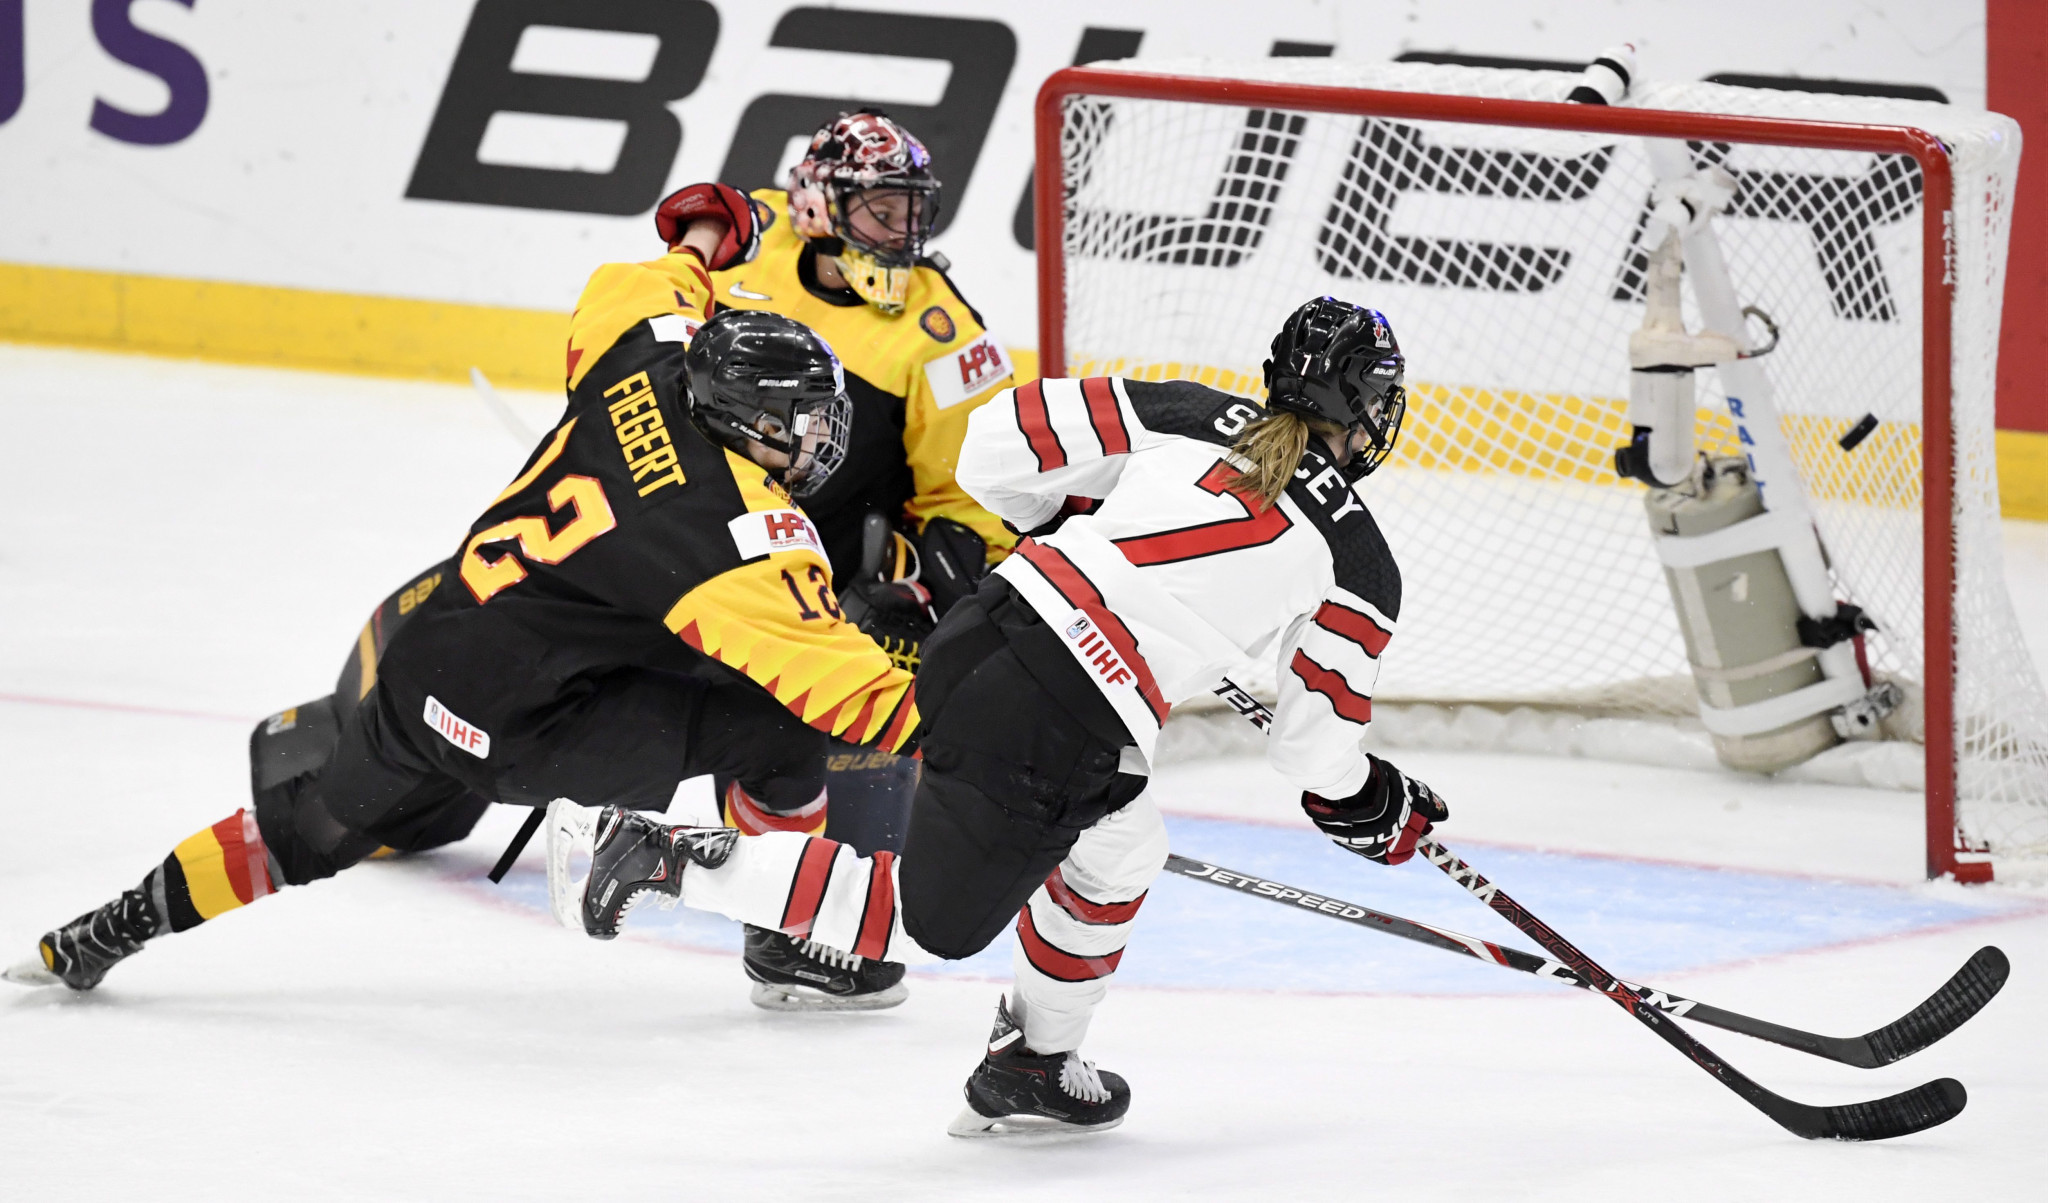 Germany were beaten by Canada in the quarter-finals of the last IIHF Women's World Championship ©Getty Images